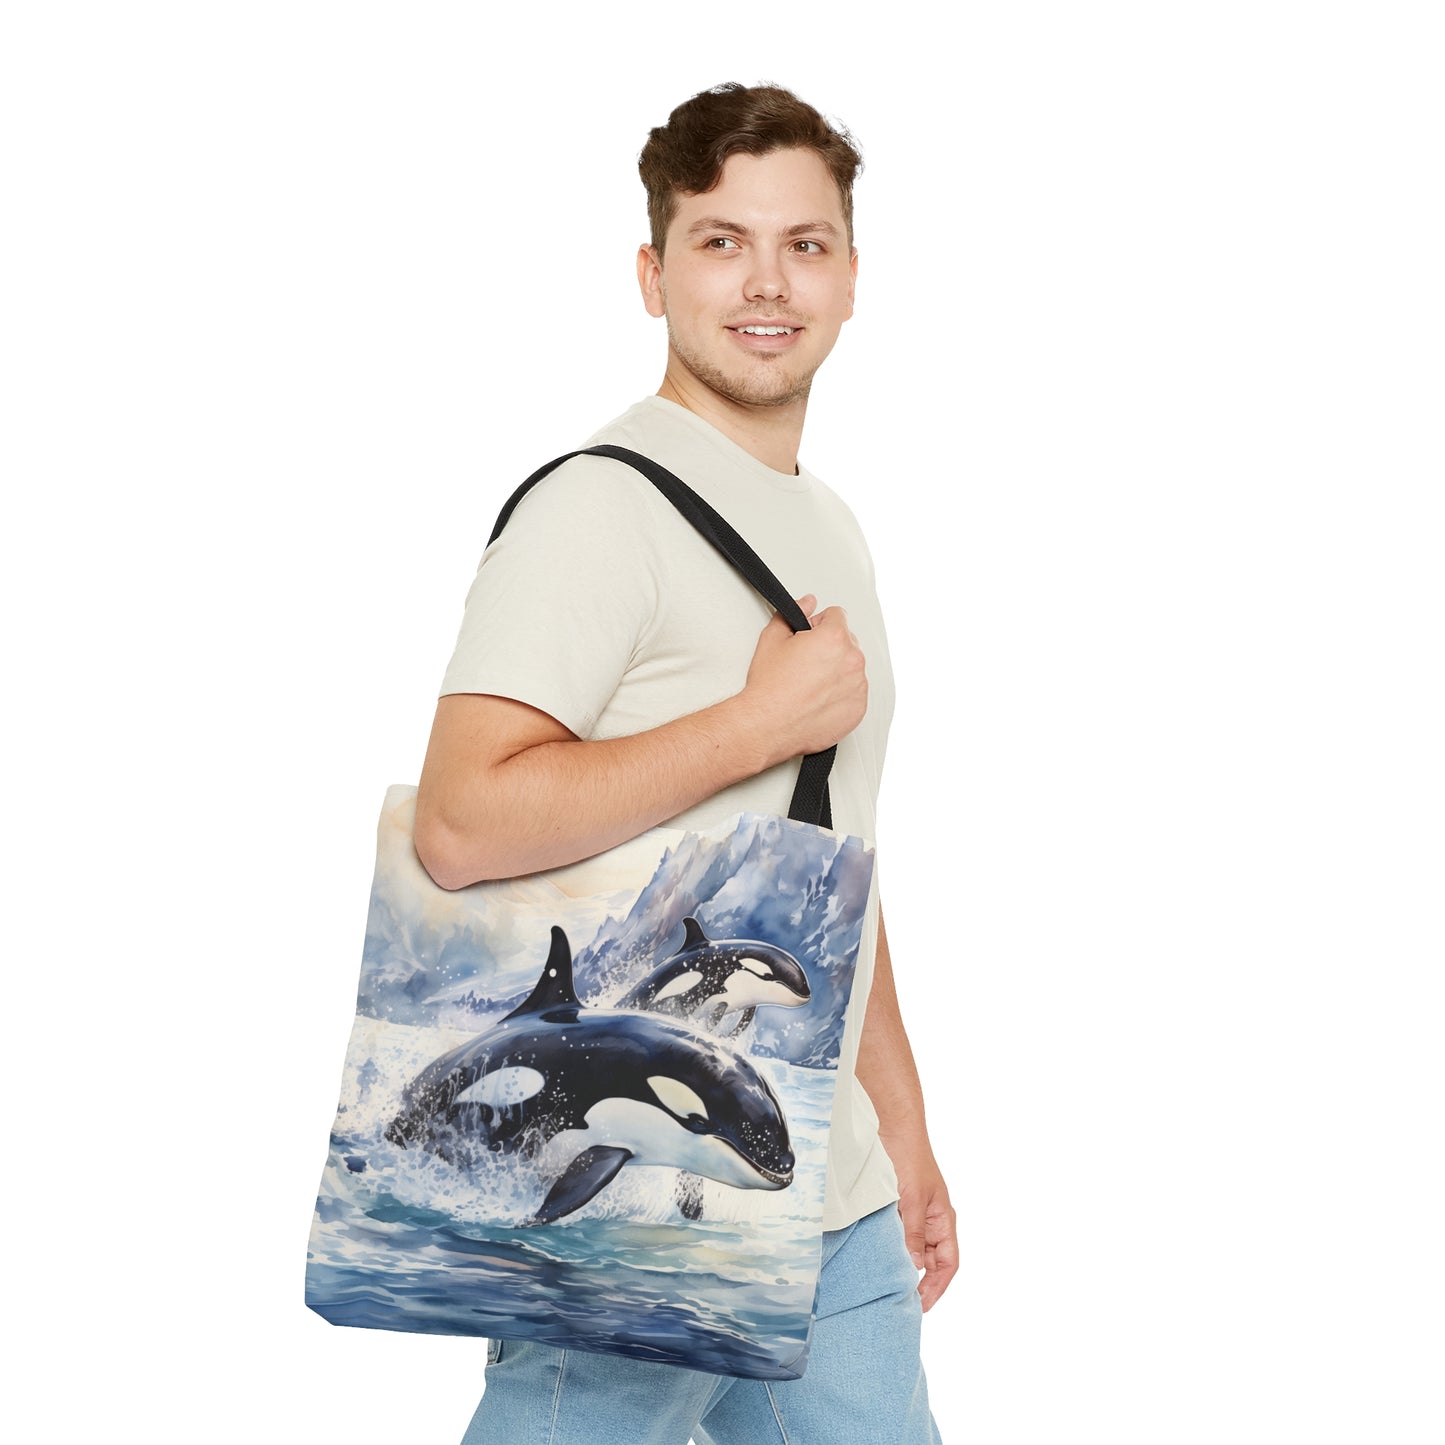 Tote Bag with Majestic Orcas, Perfect for Ocean Enthusiasts, Arctic Waters Adventure Bag, Travel Bag